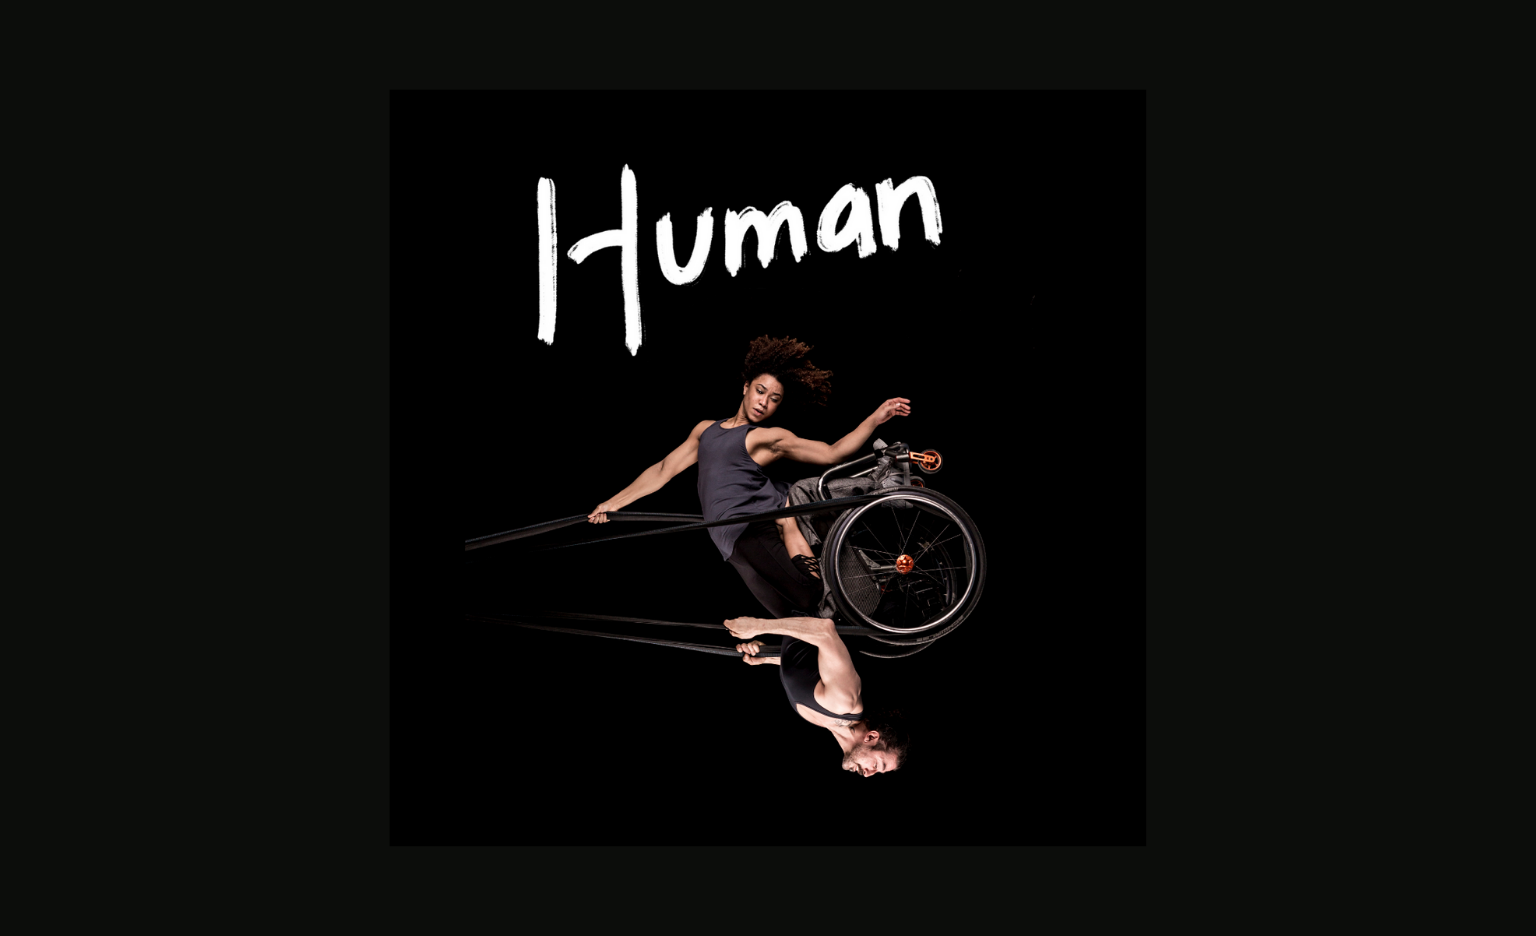 Black background. A photo of a woman and a man swinging in the air like a pendulum, looking powerful and graceful. They share a wheelchair which is held up in the air by black circus straps. She has frizzy brown hair, muscular arms and wears a grey tank top She is sitting on knees on his thighs and one of her arms holds the straps above her head while the other points down towards the floor. He has a neatly trimmed brown beard, muscular arms and wears a black tank top. He holds the straps to the sides of his chest with both hands. The image captures them at the highest point of the swing, to our right, bringing the man to an upside-down position with the woman above him. Their bodies are doing something hard, but their strength makes it look effortless. One word written in white, thick, brush-style letters to the right of the photo: 'Human'.